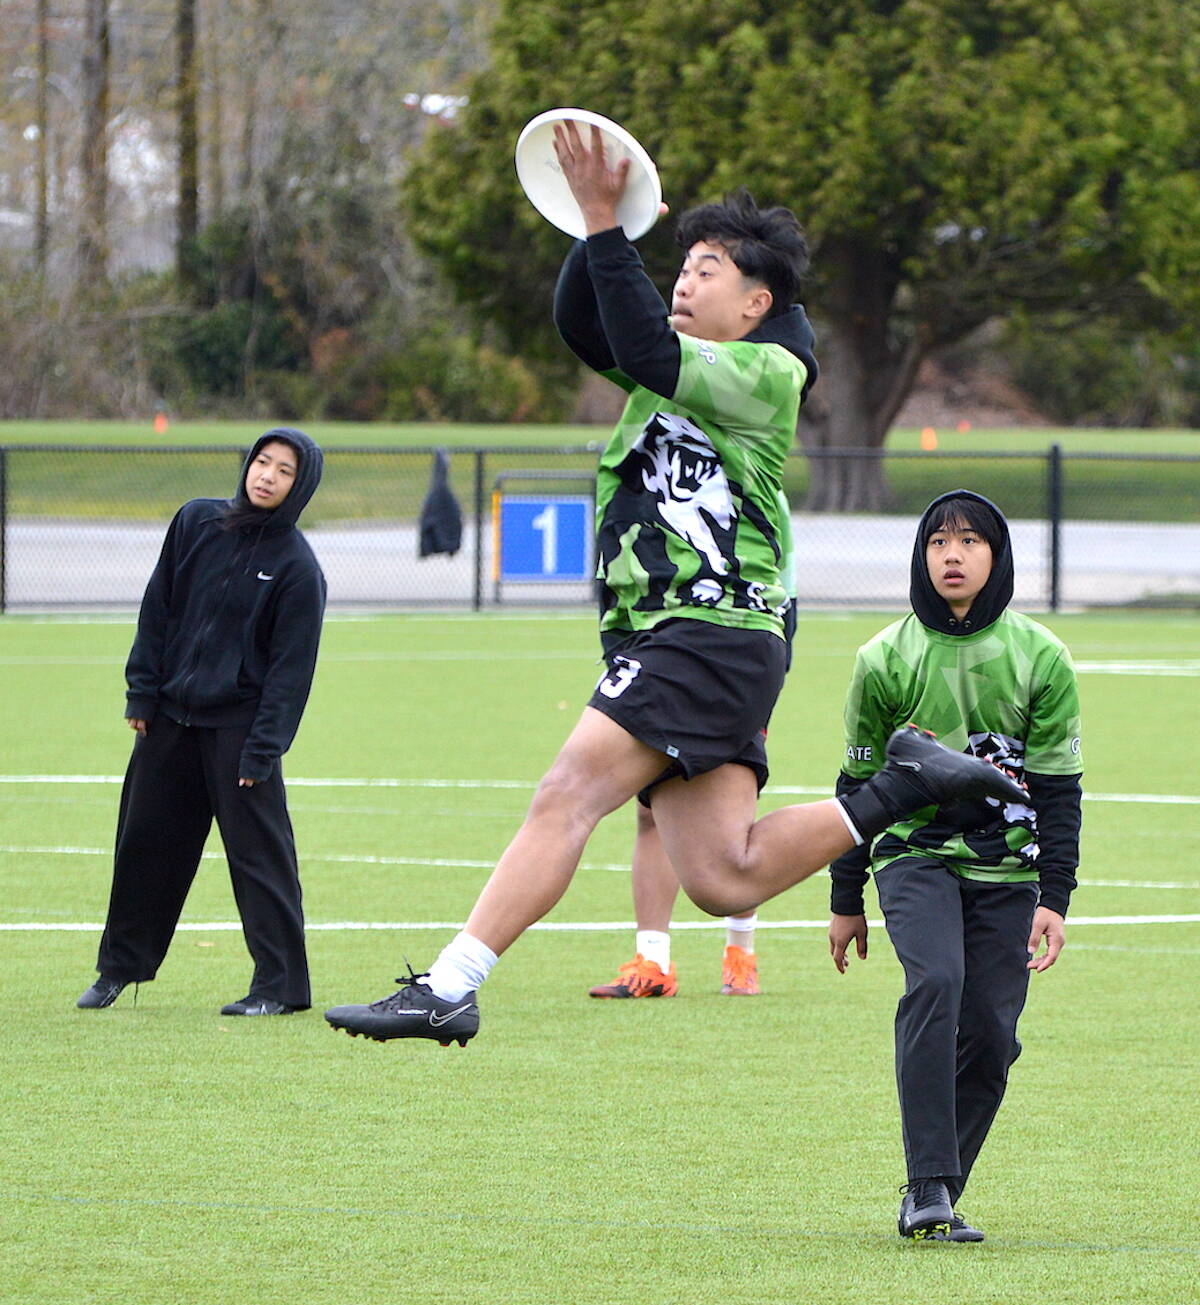 PHOTOS: A windy, cold day for ultimate in Surrey as the disc sport